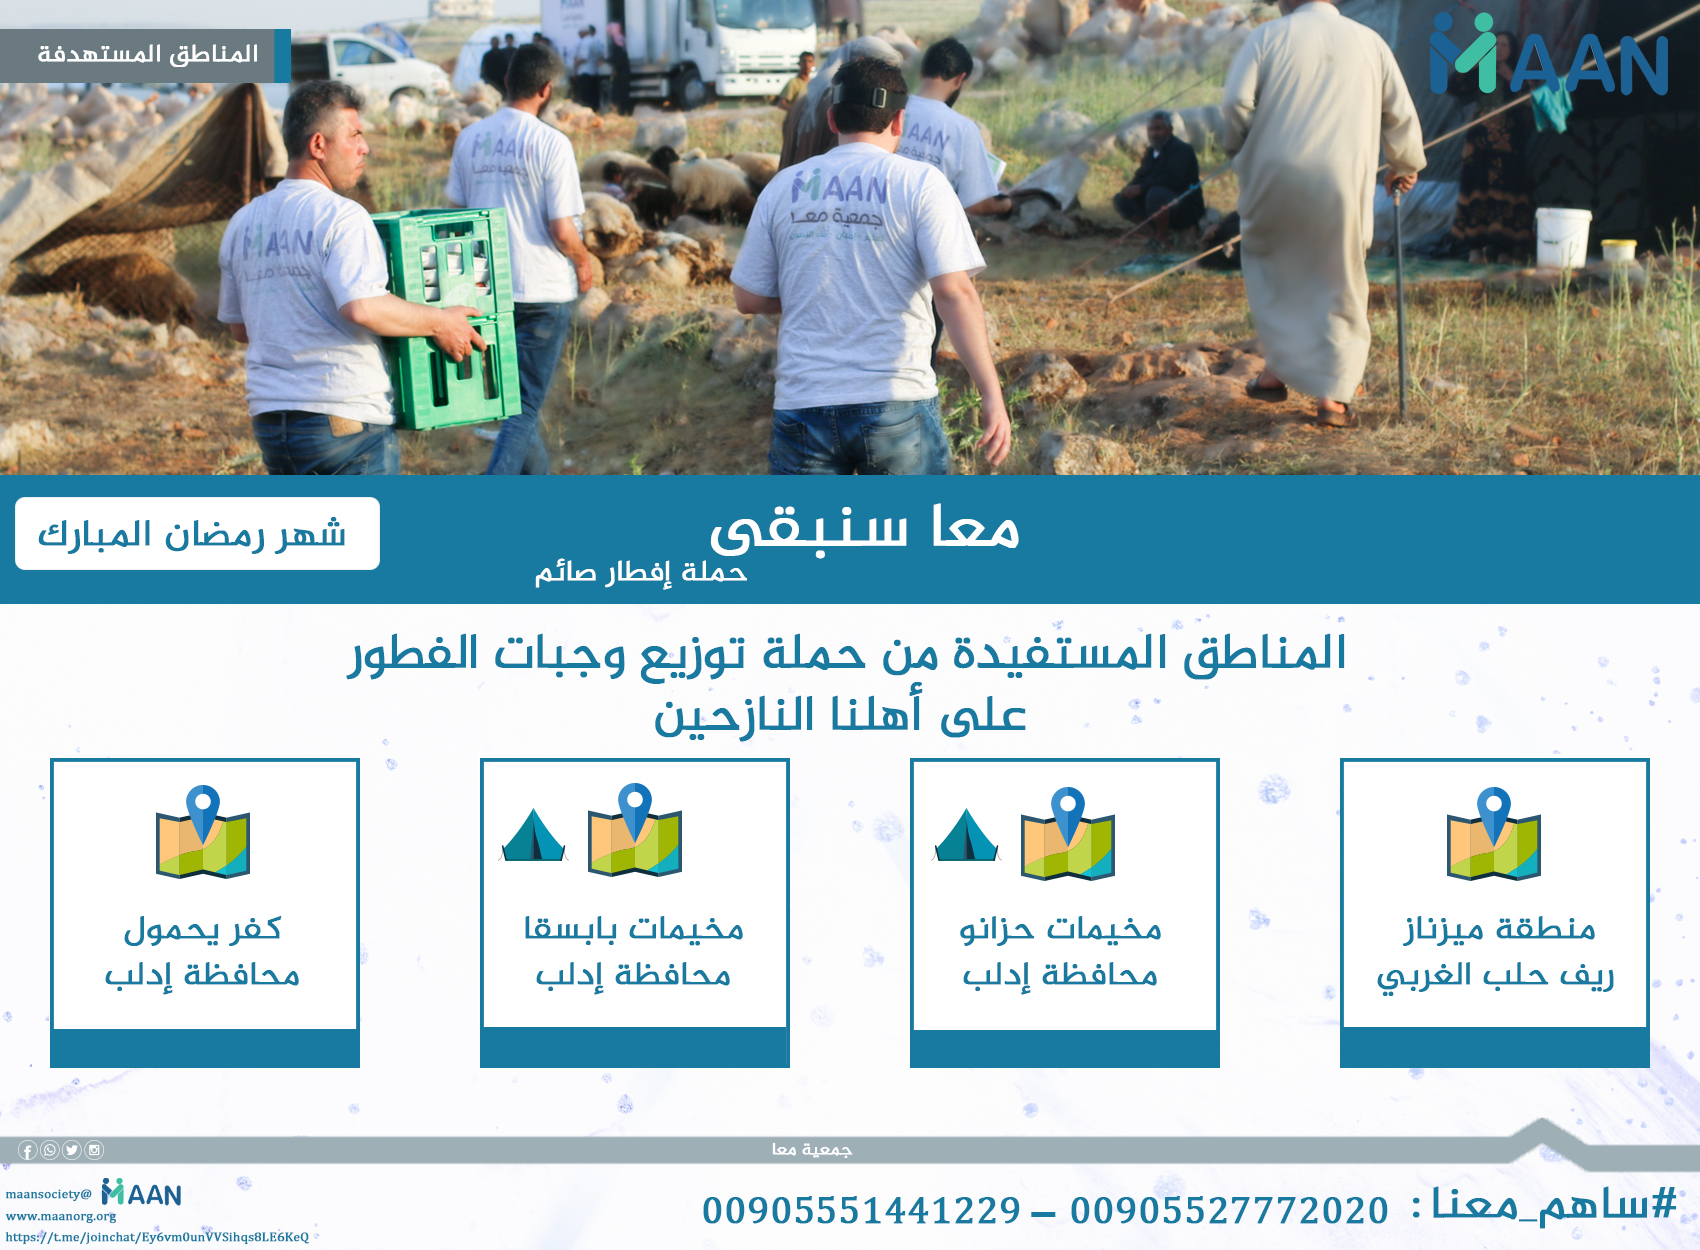 The targeted areas by Iftar Campaign